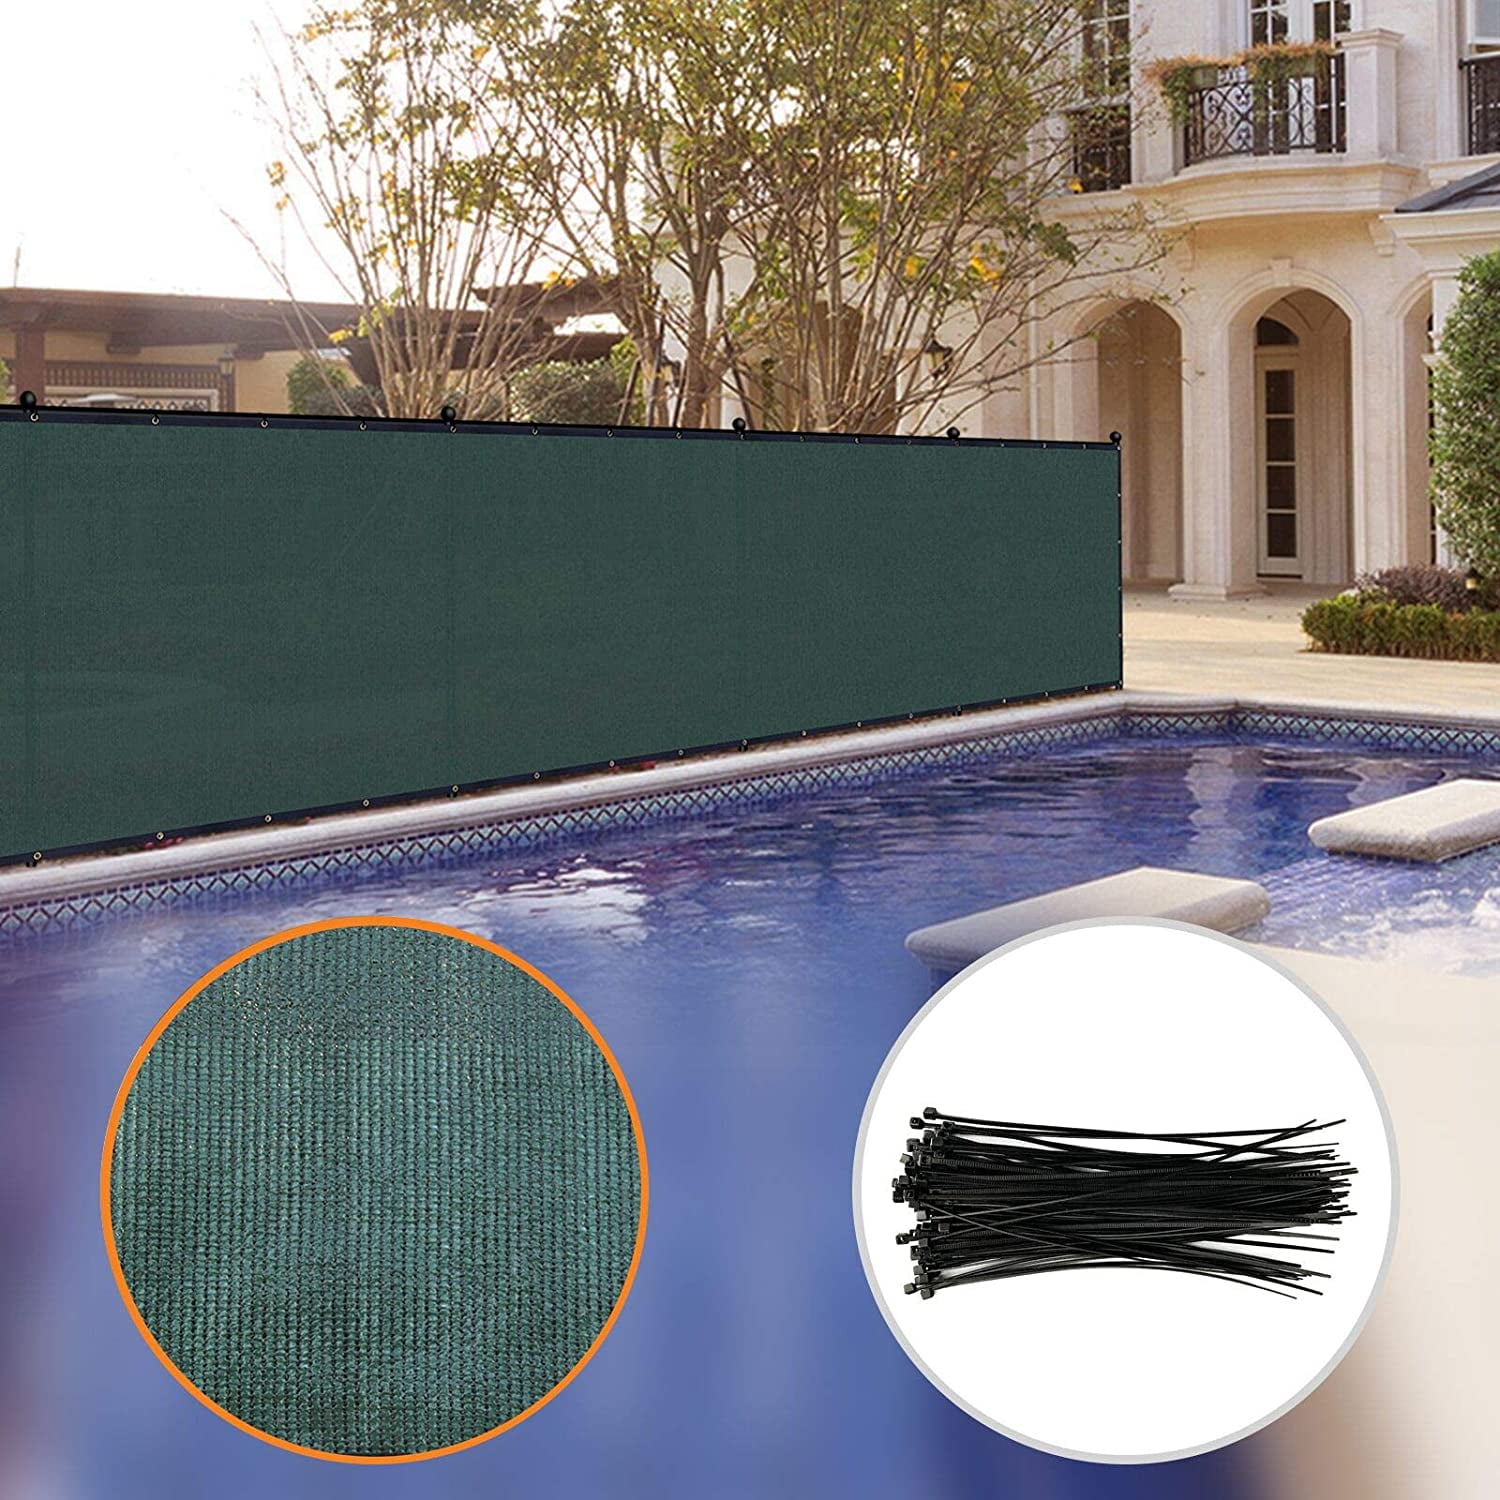 7 x 2, Beige Ifenceview 7 x 2 to 7 x 100 Shade Cloth Fabric Fence Privacy Screen Panels Mesh Net for Construction Site Yard Driveway Garden Pergolas Gazebos Railing Canopy Awning 180 GSM 